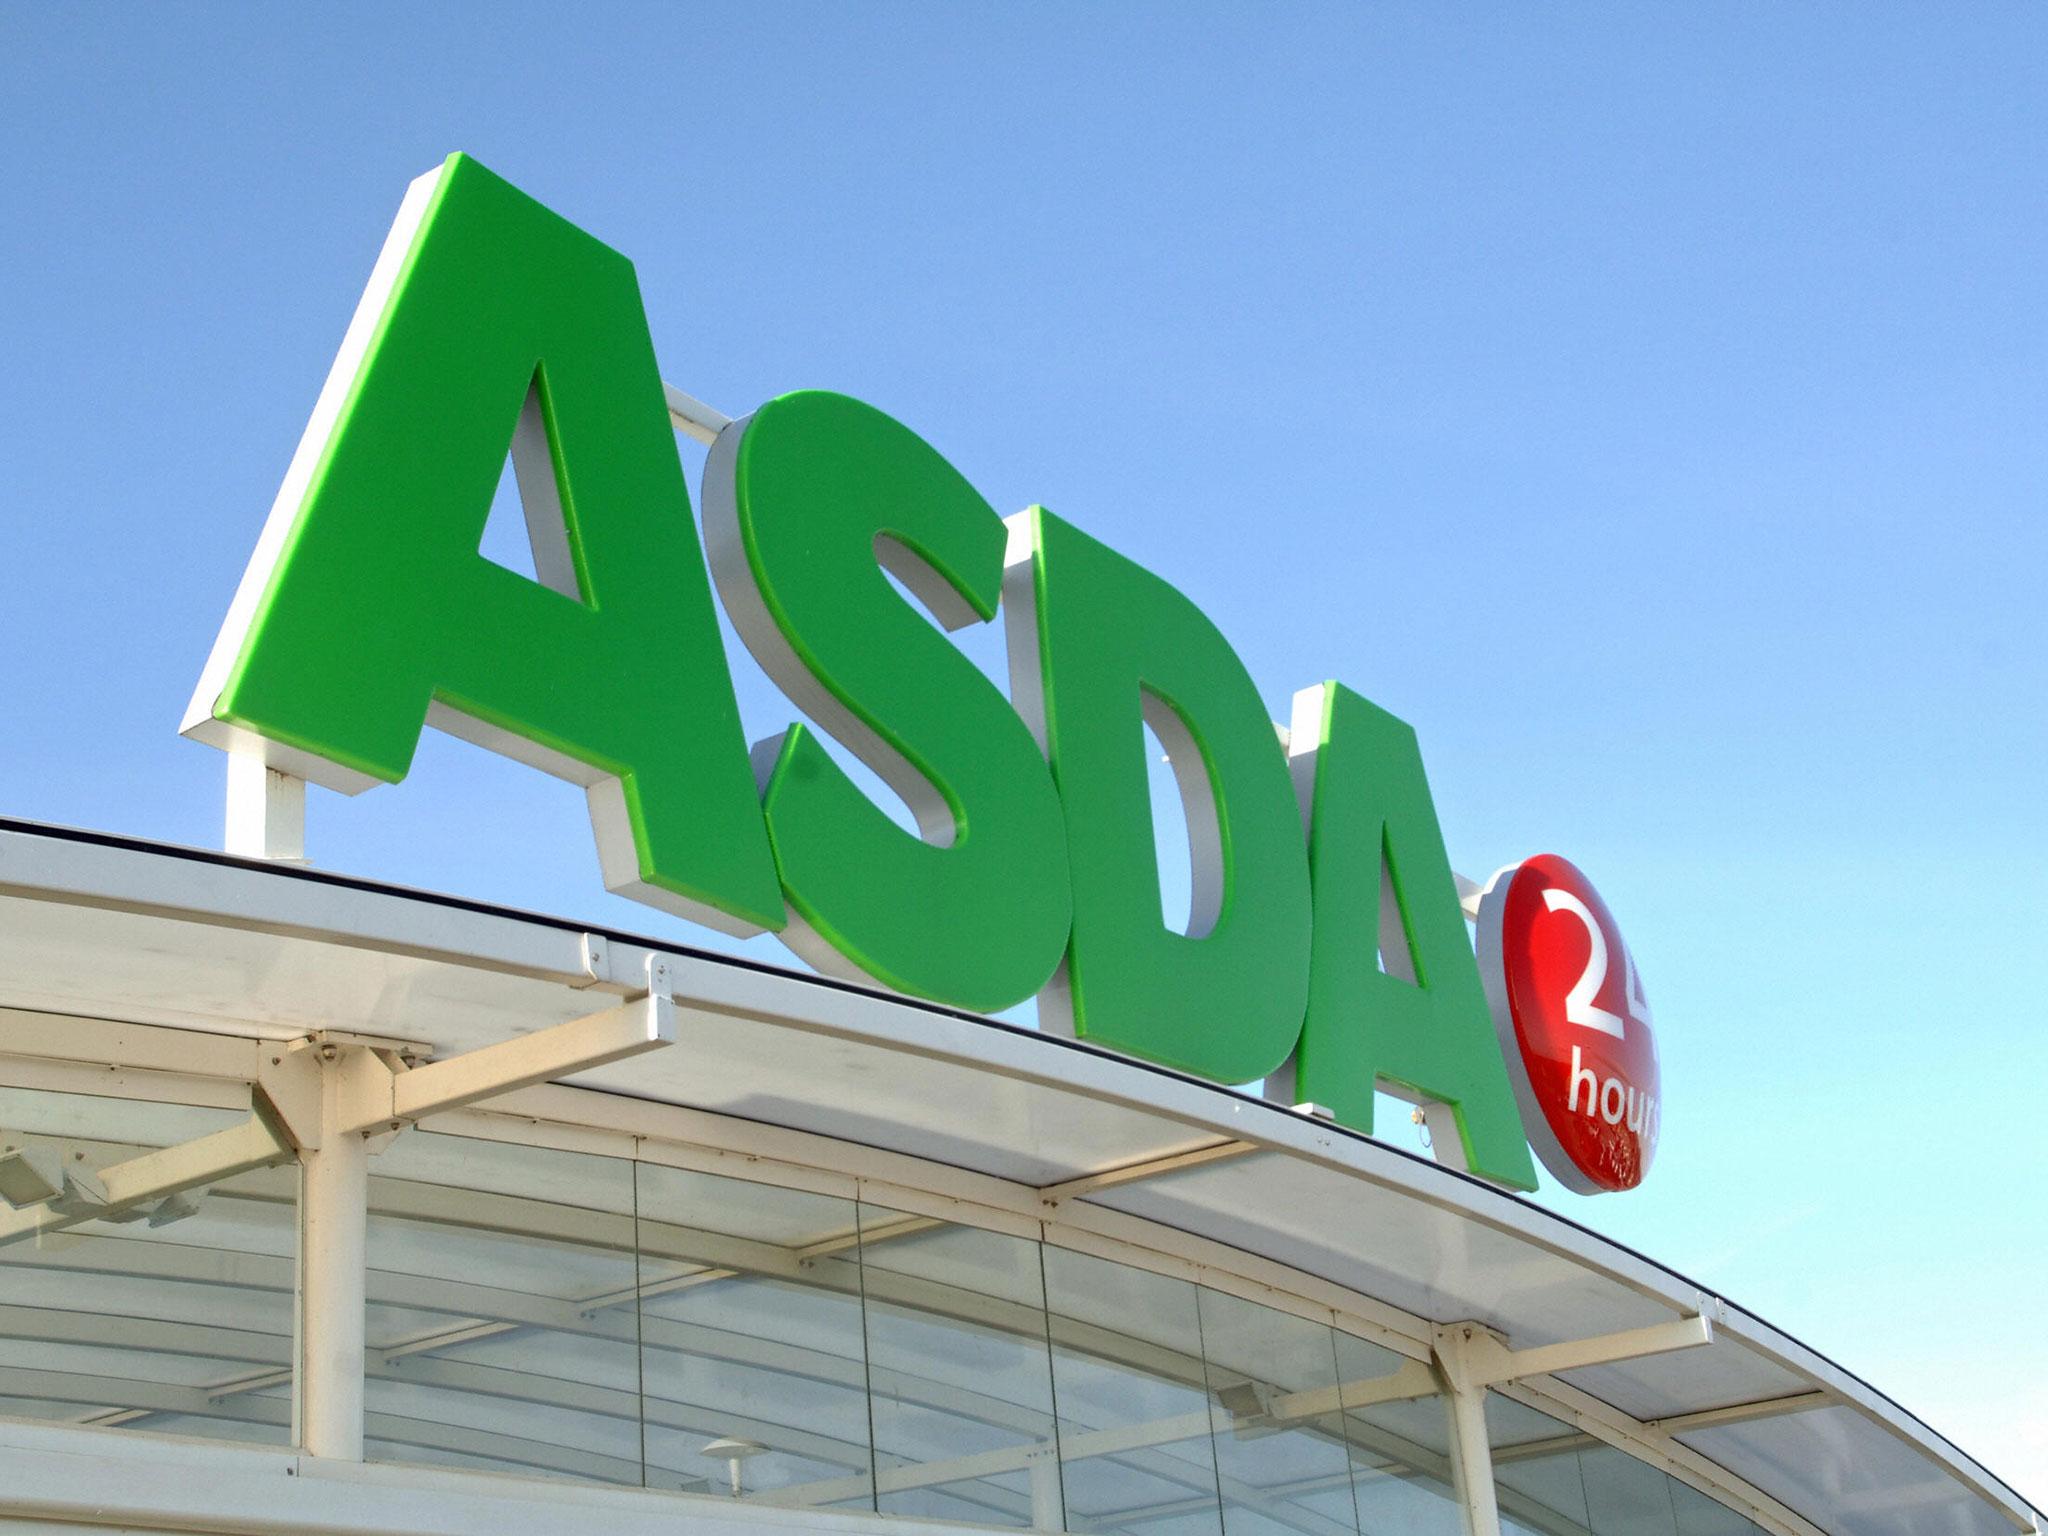 Asda is embroiled in a legal battle over staff pay disparity